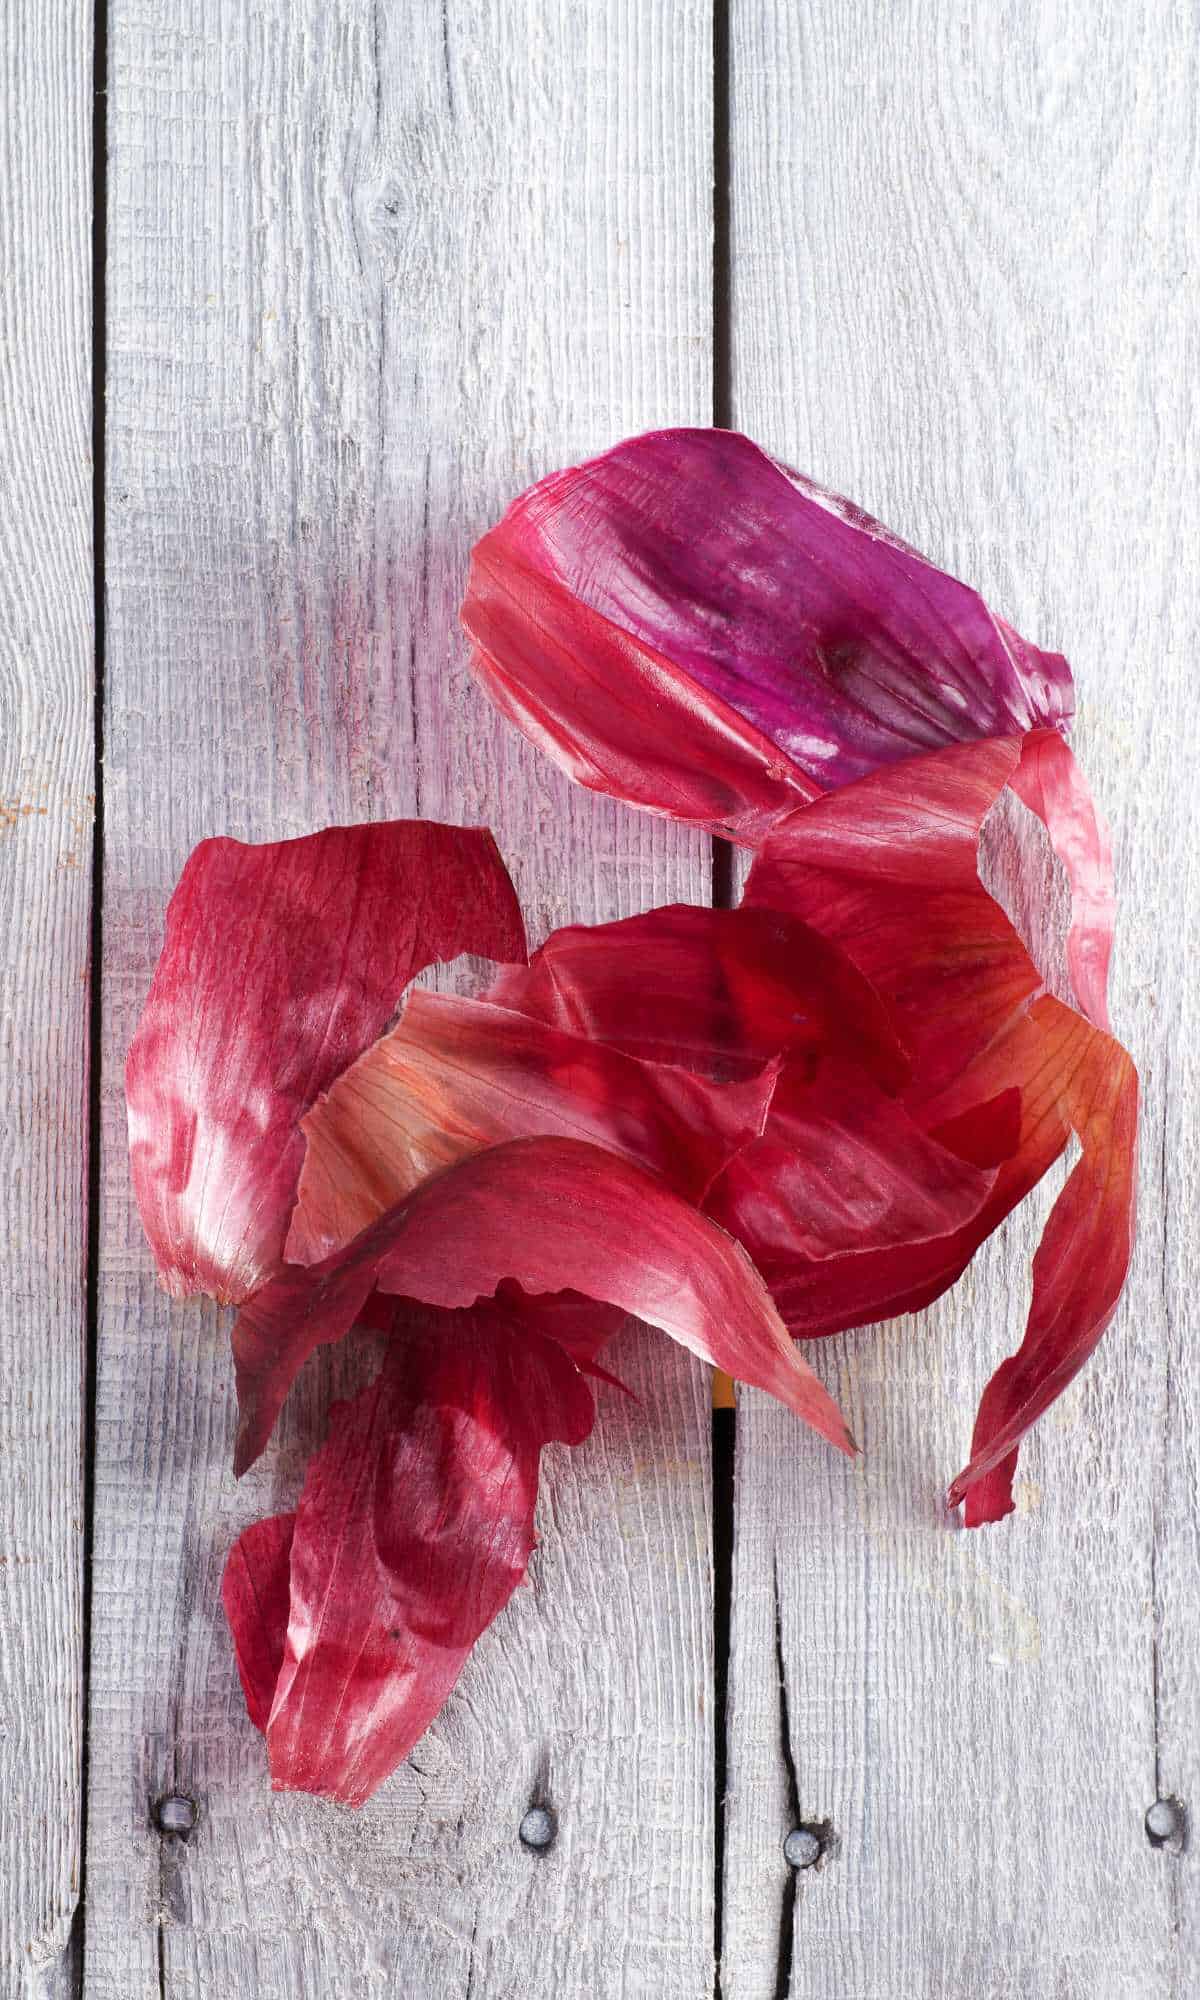 red onion skins need for dyeing Easter eggs